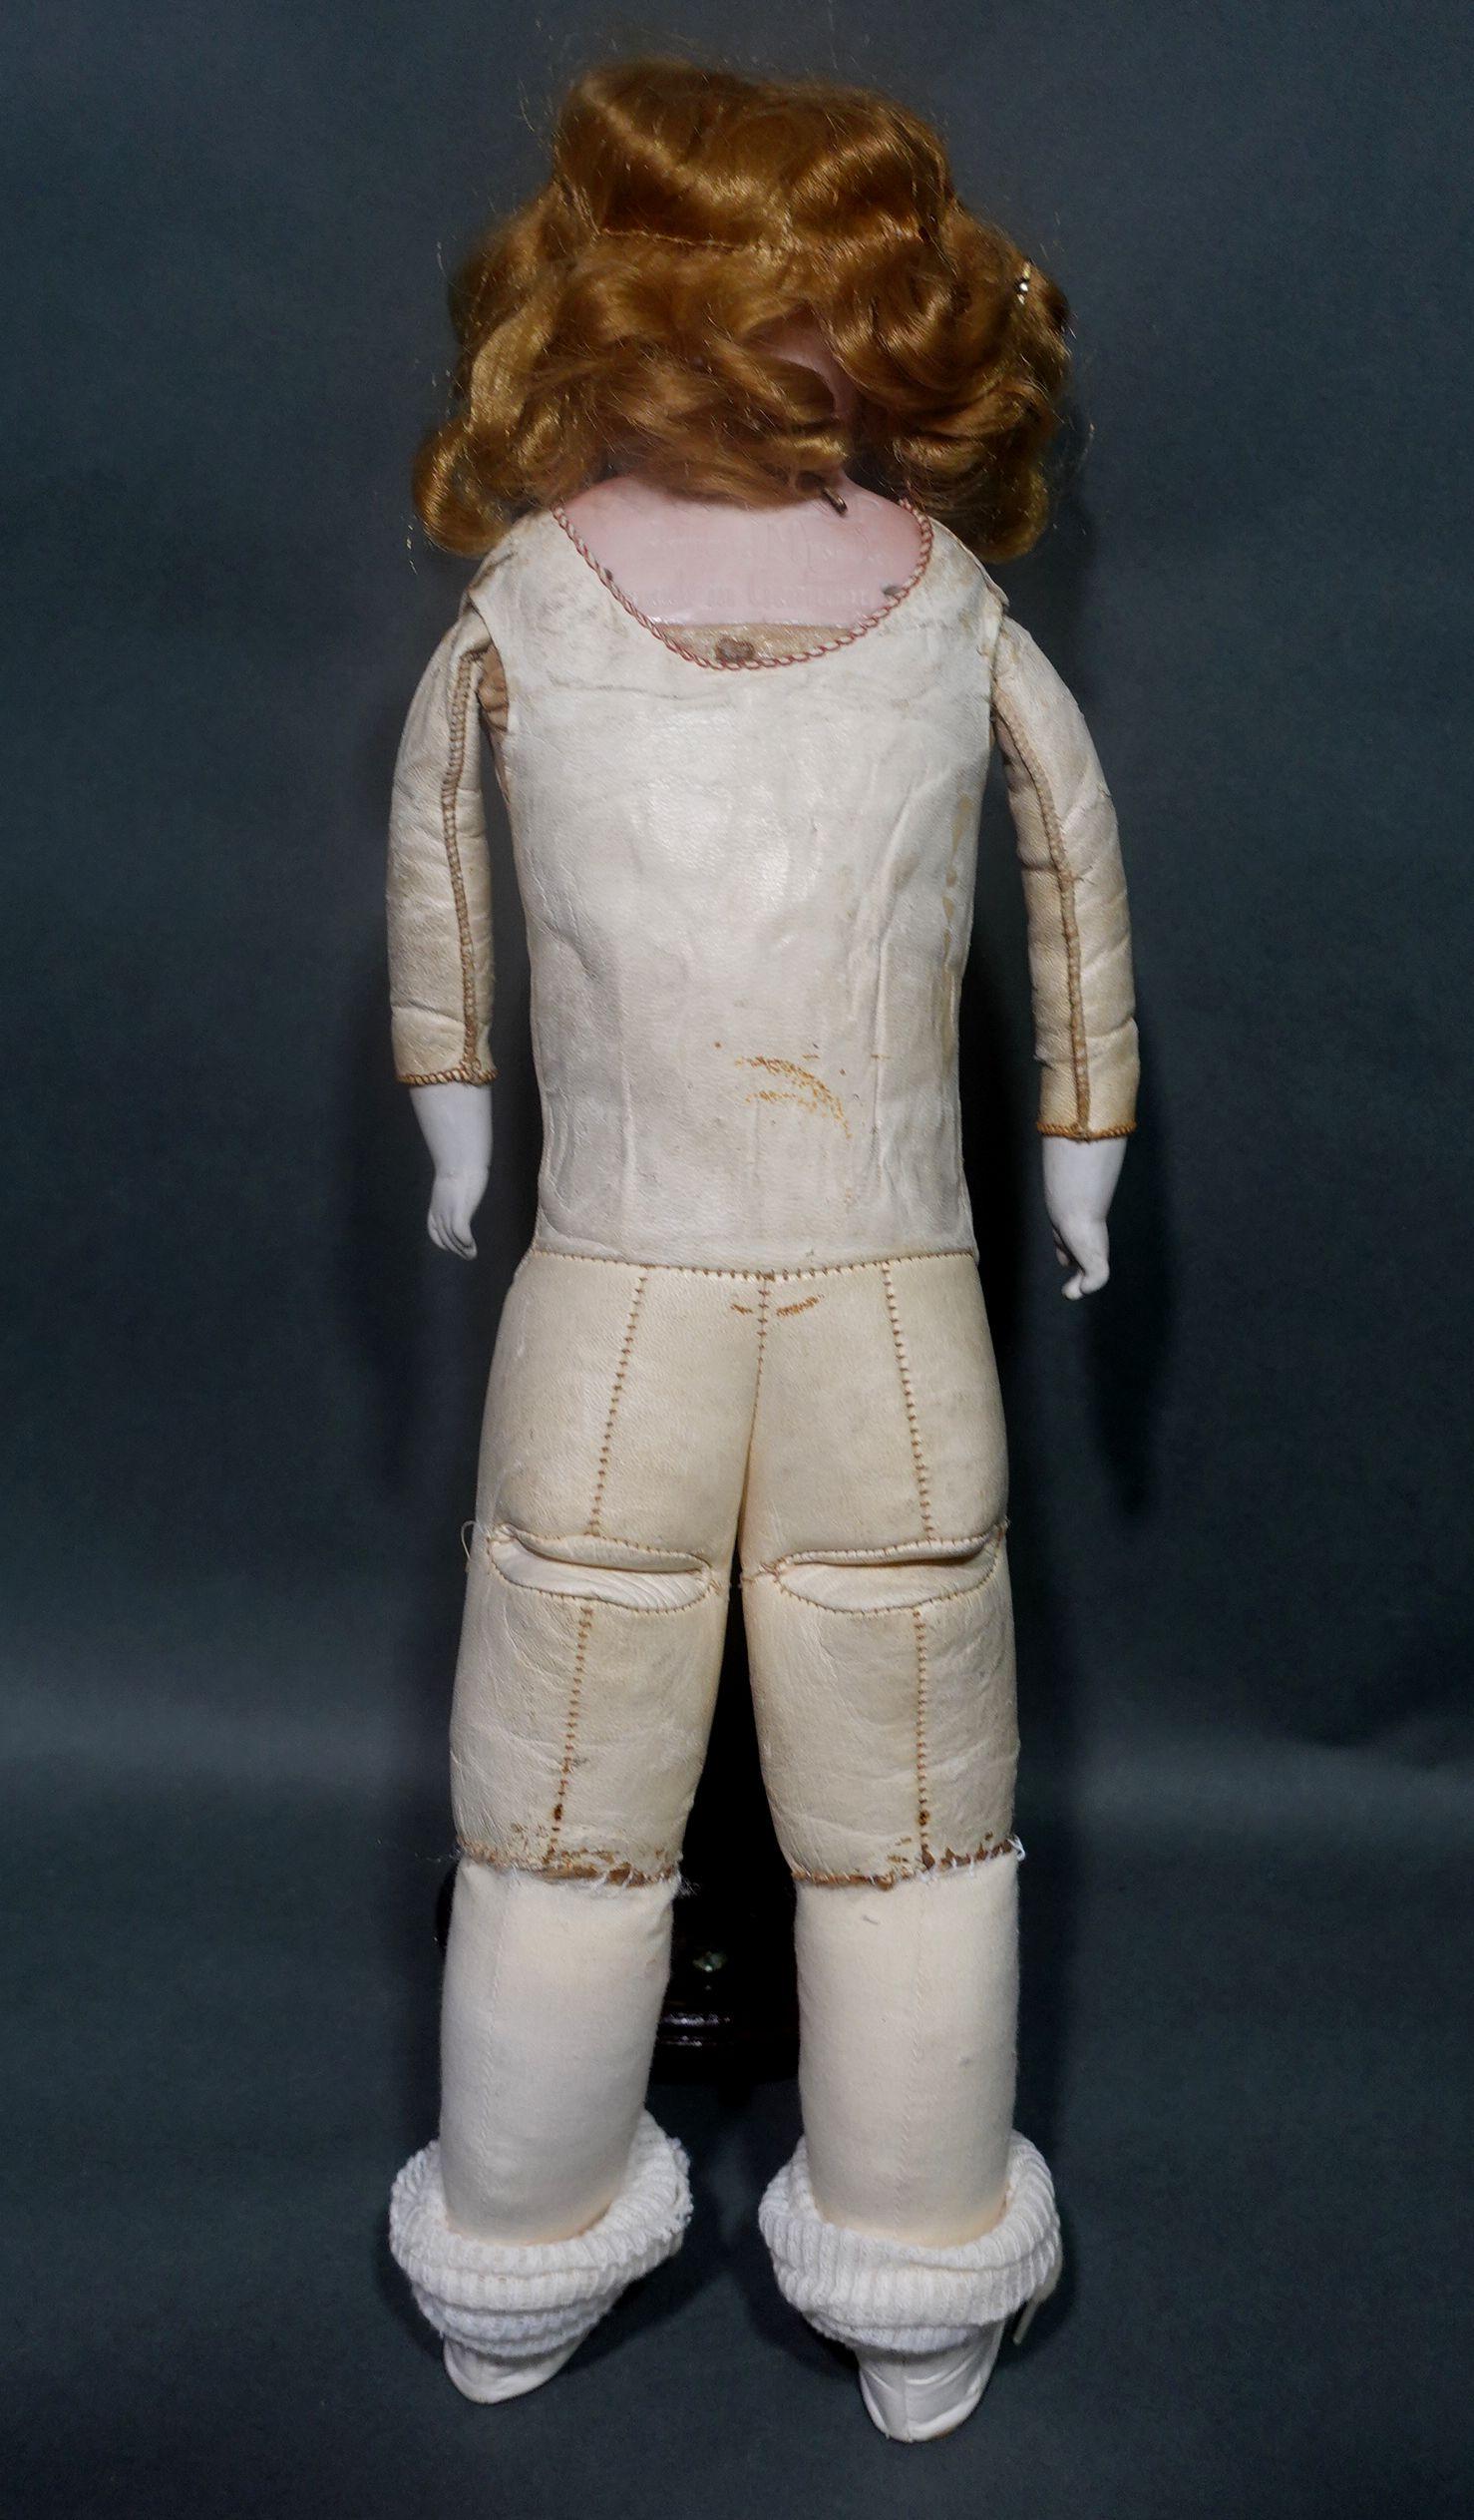 Early 20th Century Antique German Bisque Doll 370 A & M-2/OX-DEP Armand Marseille, Ric#003 For Sale